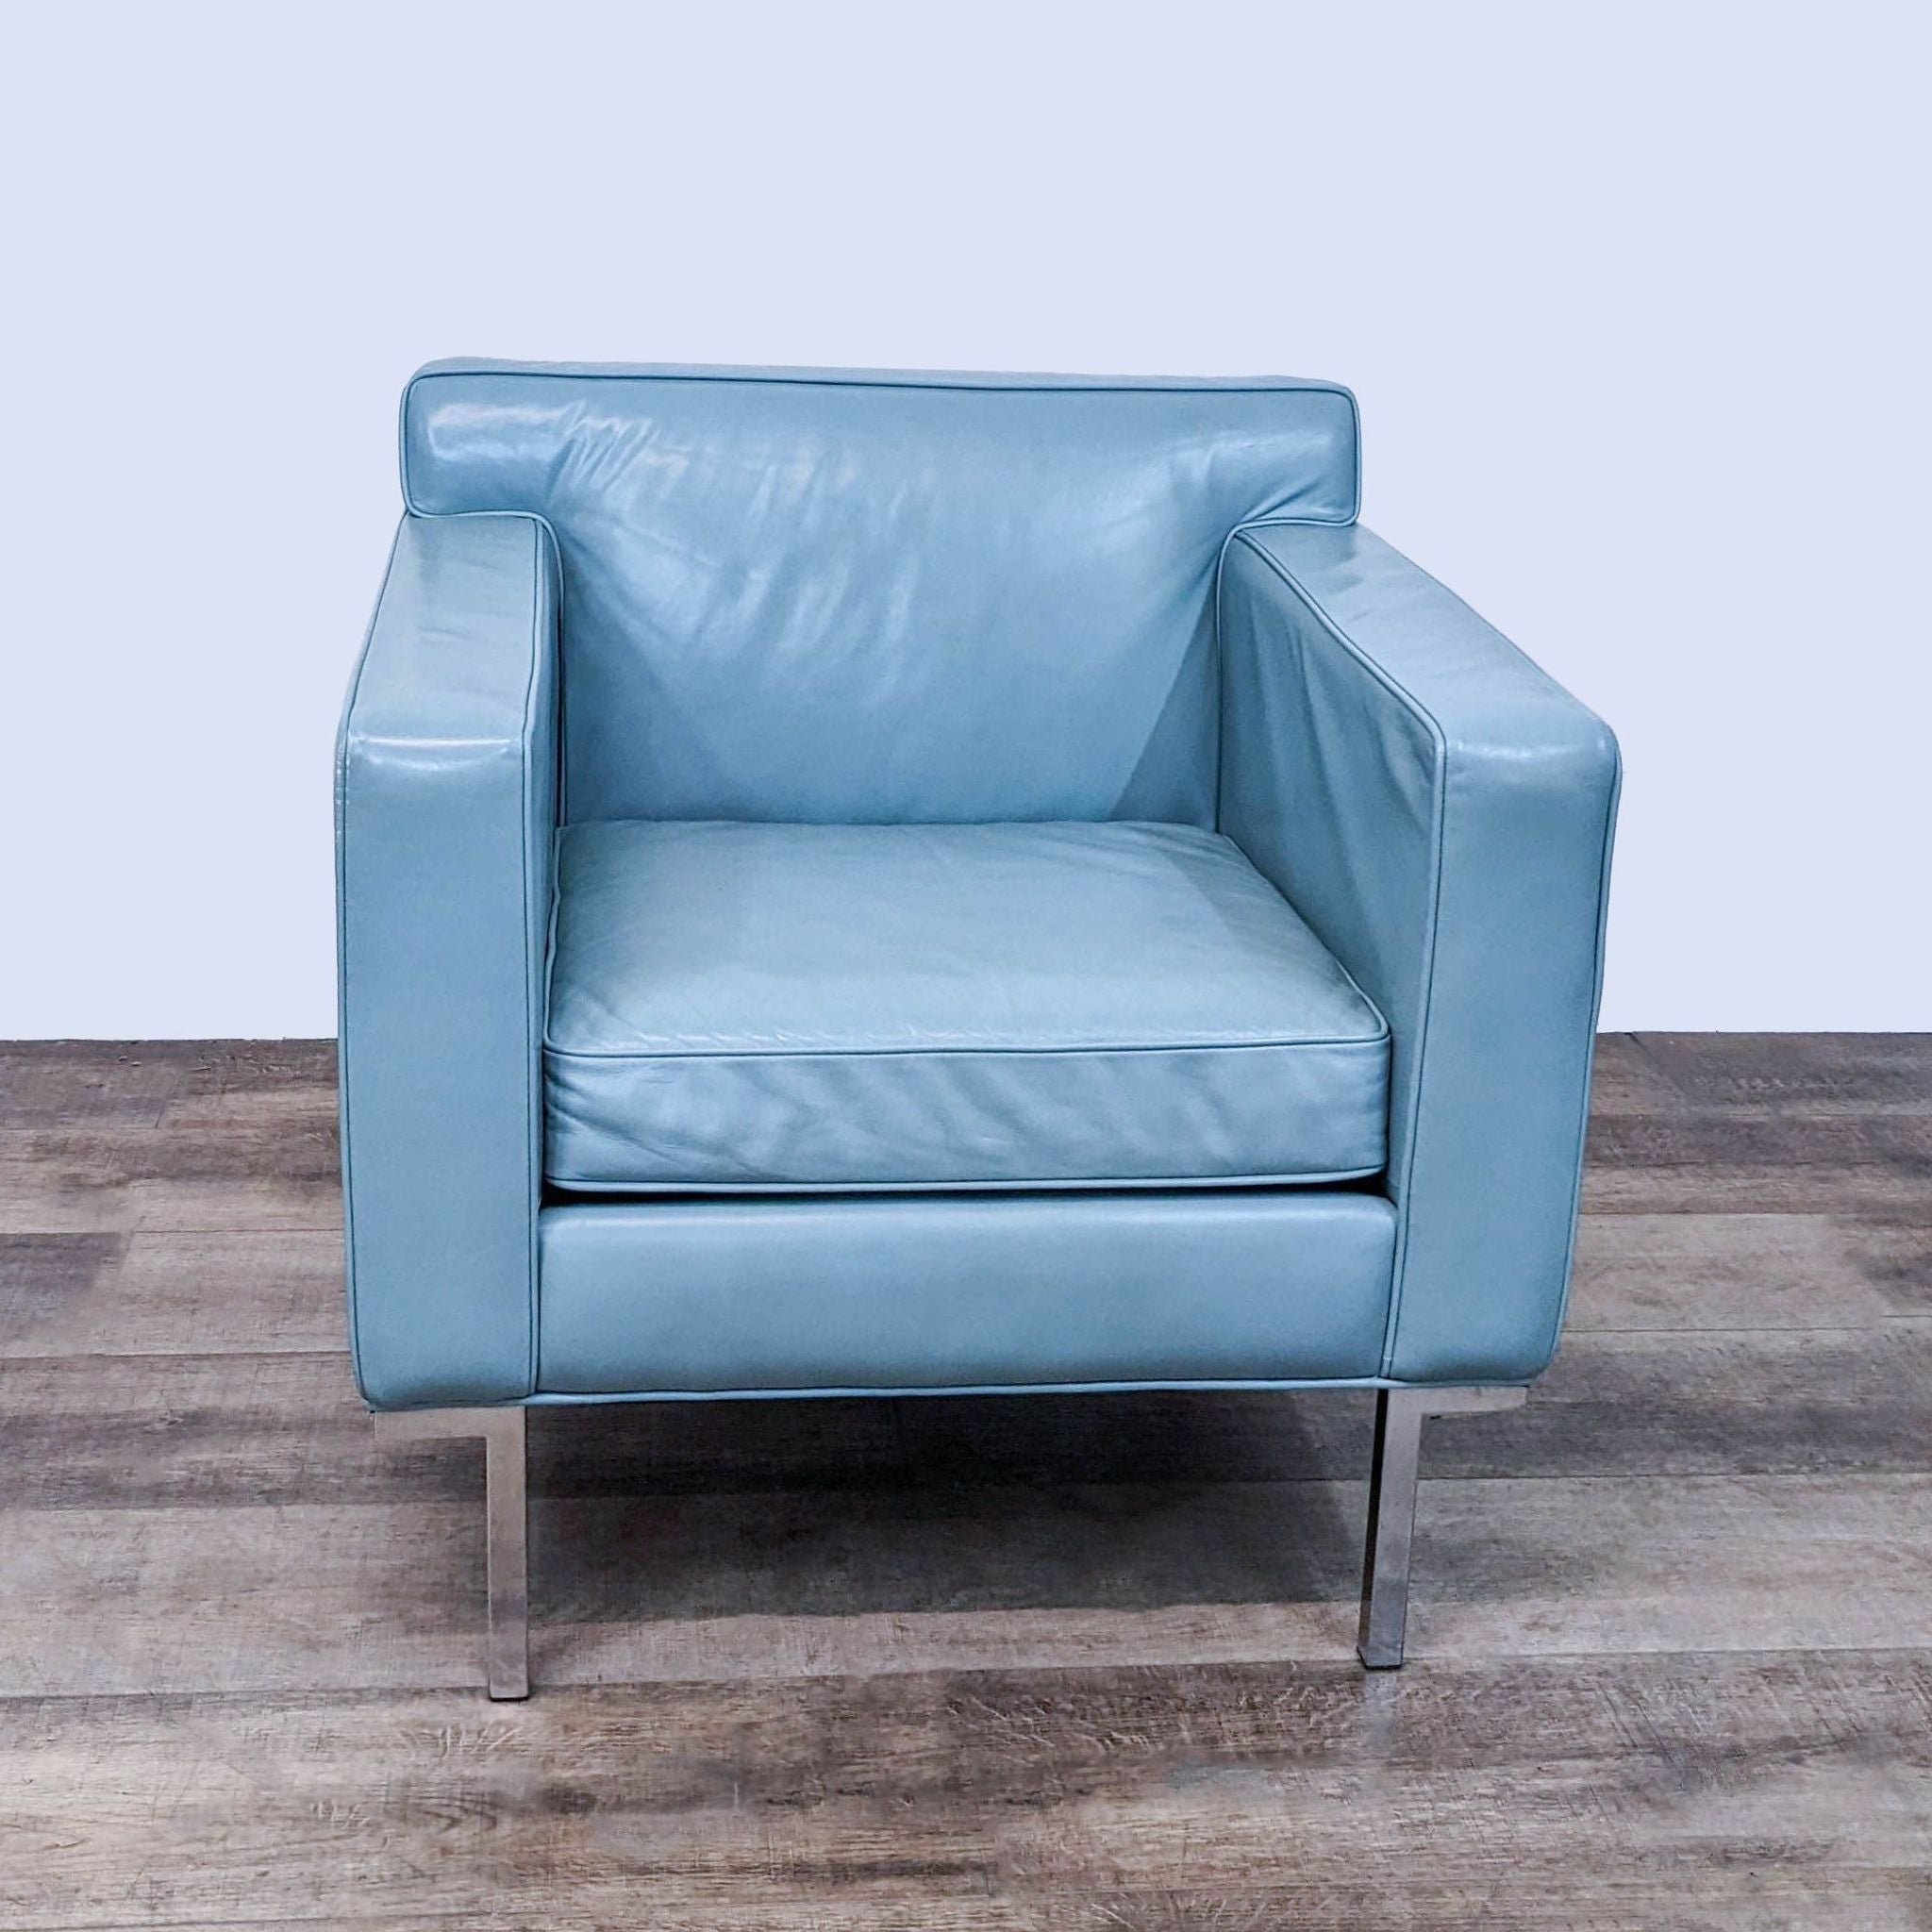 Design Within Reach Theatre armchair with light blue leather upholstery, an angled backrest, and elevated armrests on a chromed steel base.